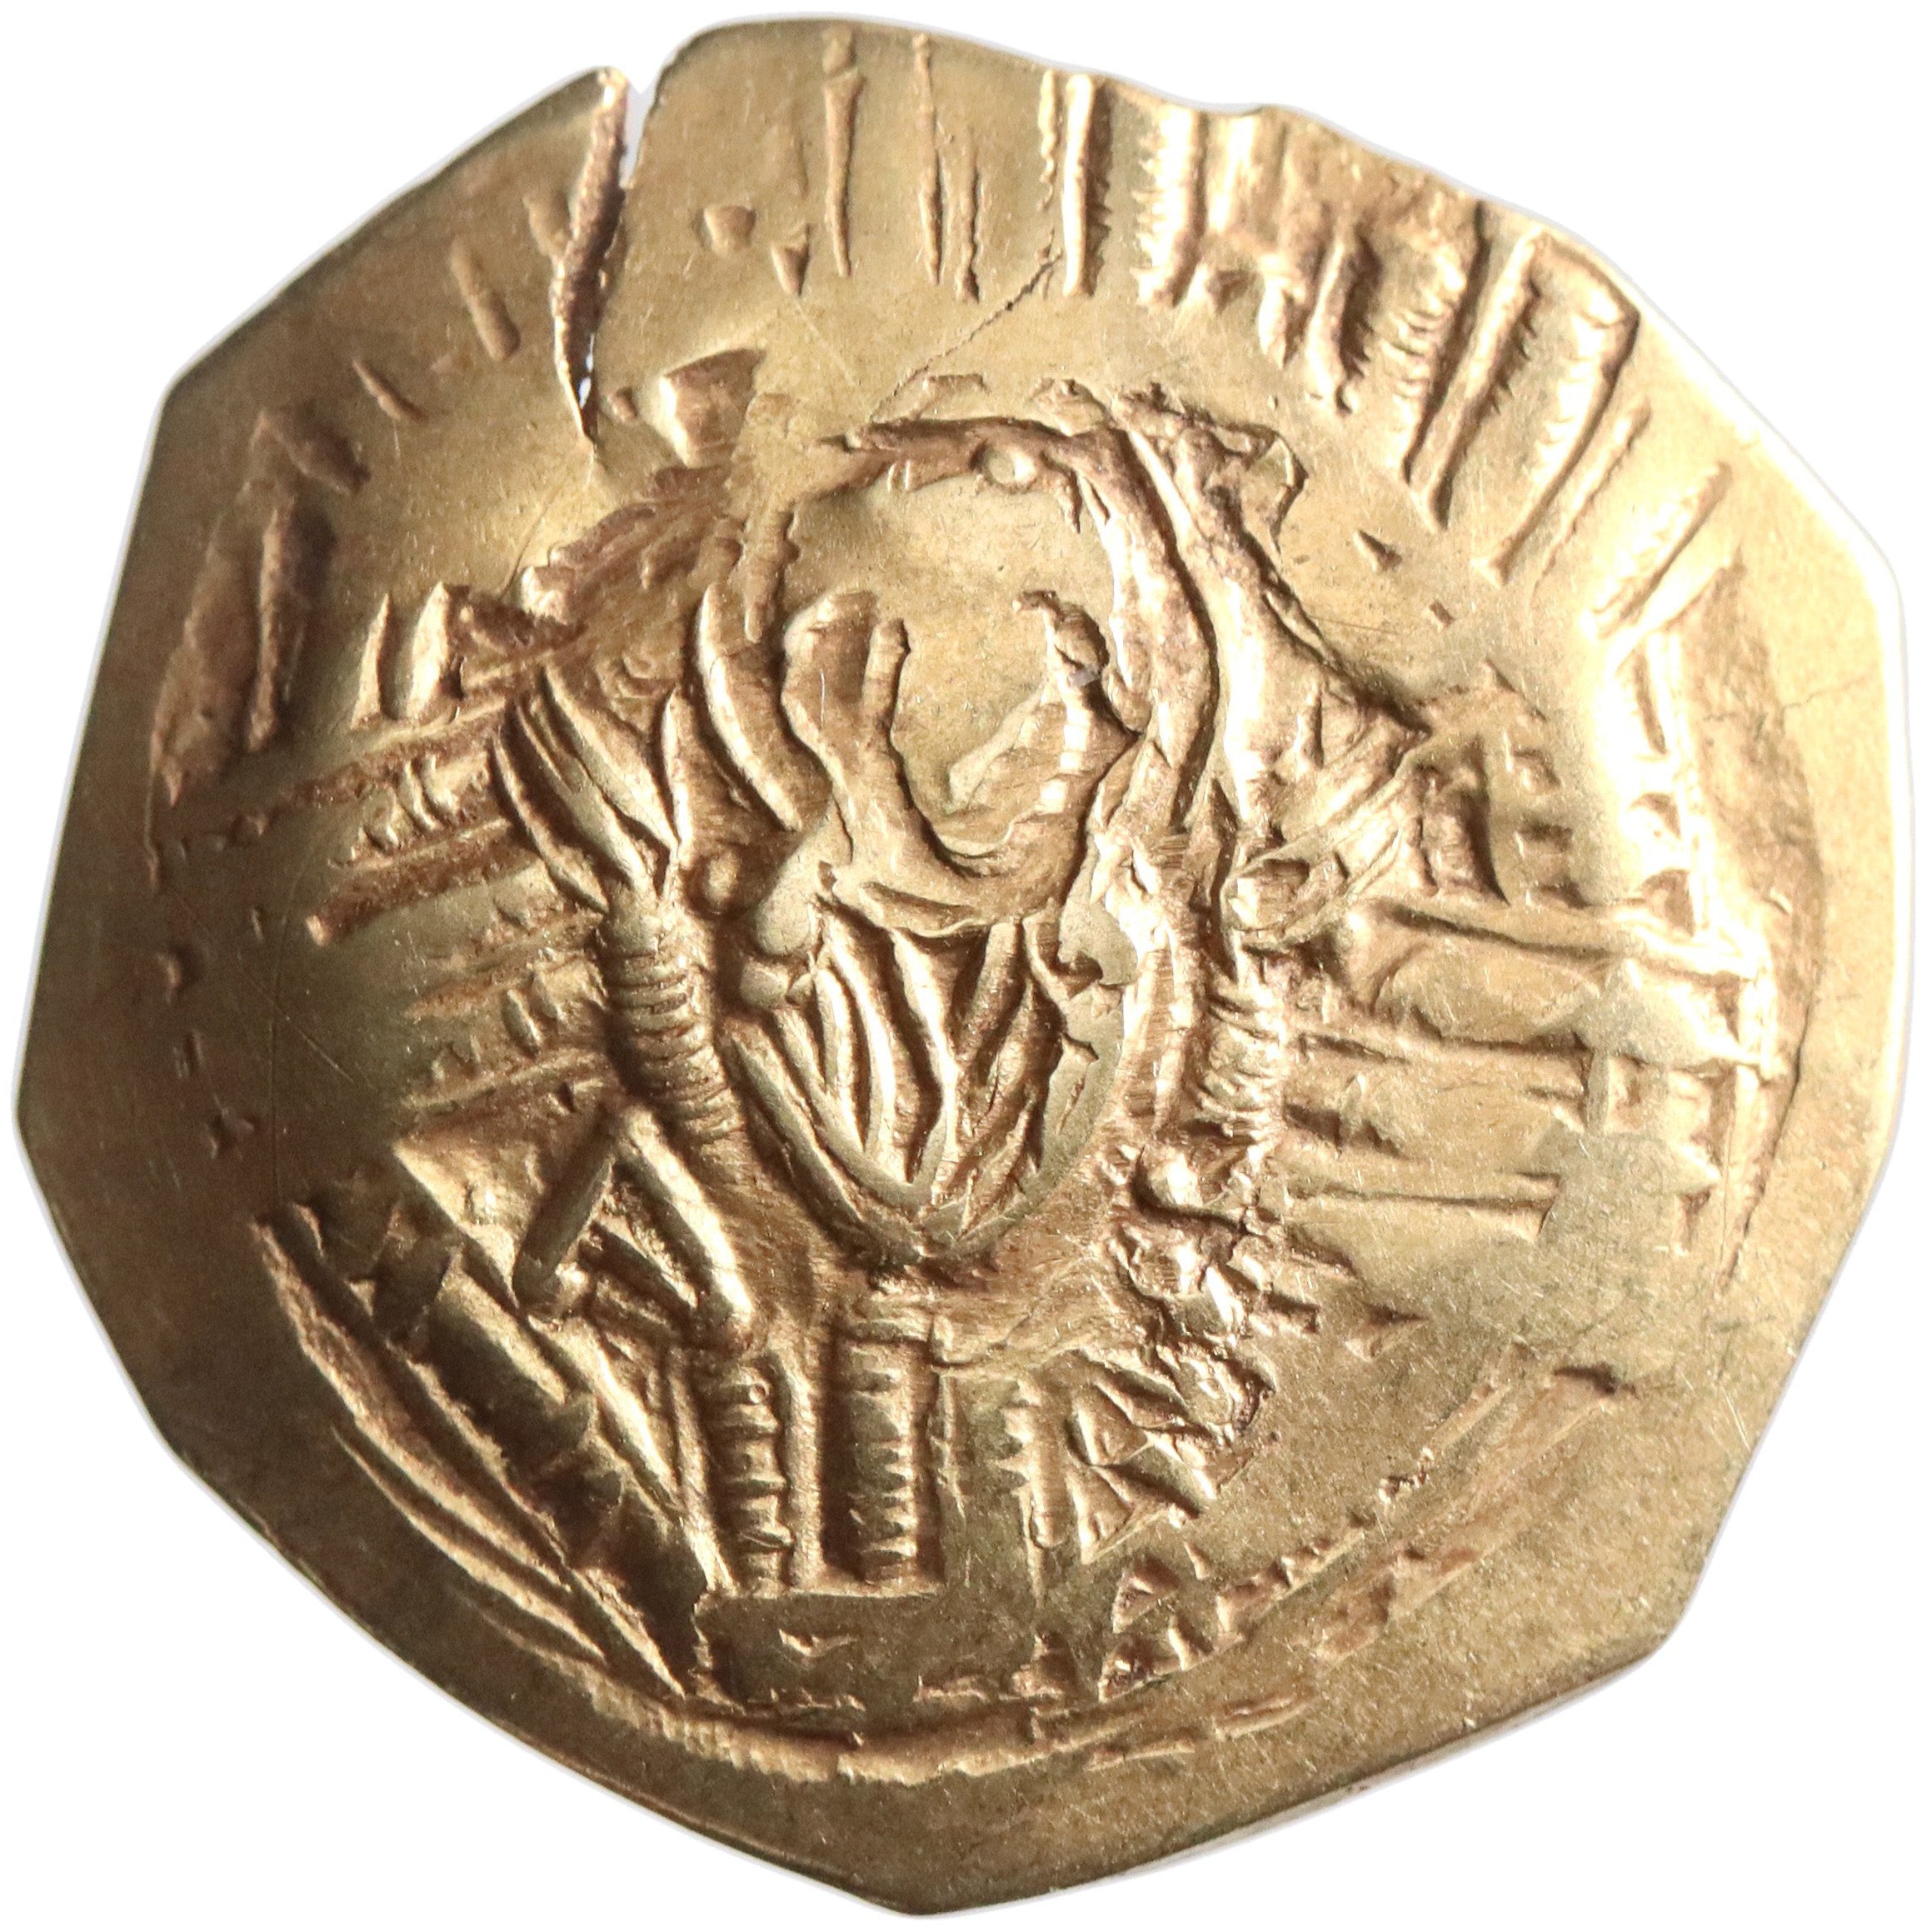 Byzantine, Andronicus II, gold/electrum hyperpyron, Constantinople mint, 1282-1294 CE, bust of orans Virgin Mary within walls of the city / Christ holding gospel and placing right hand on head of Andronicus II